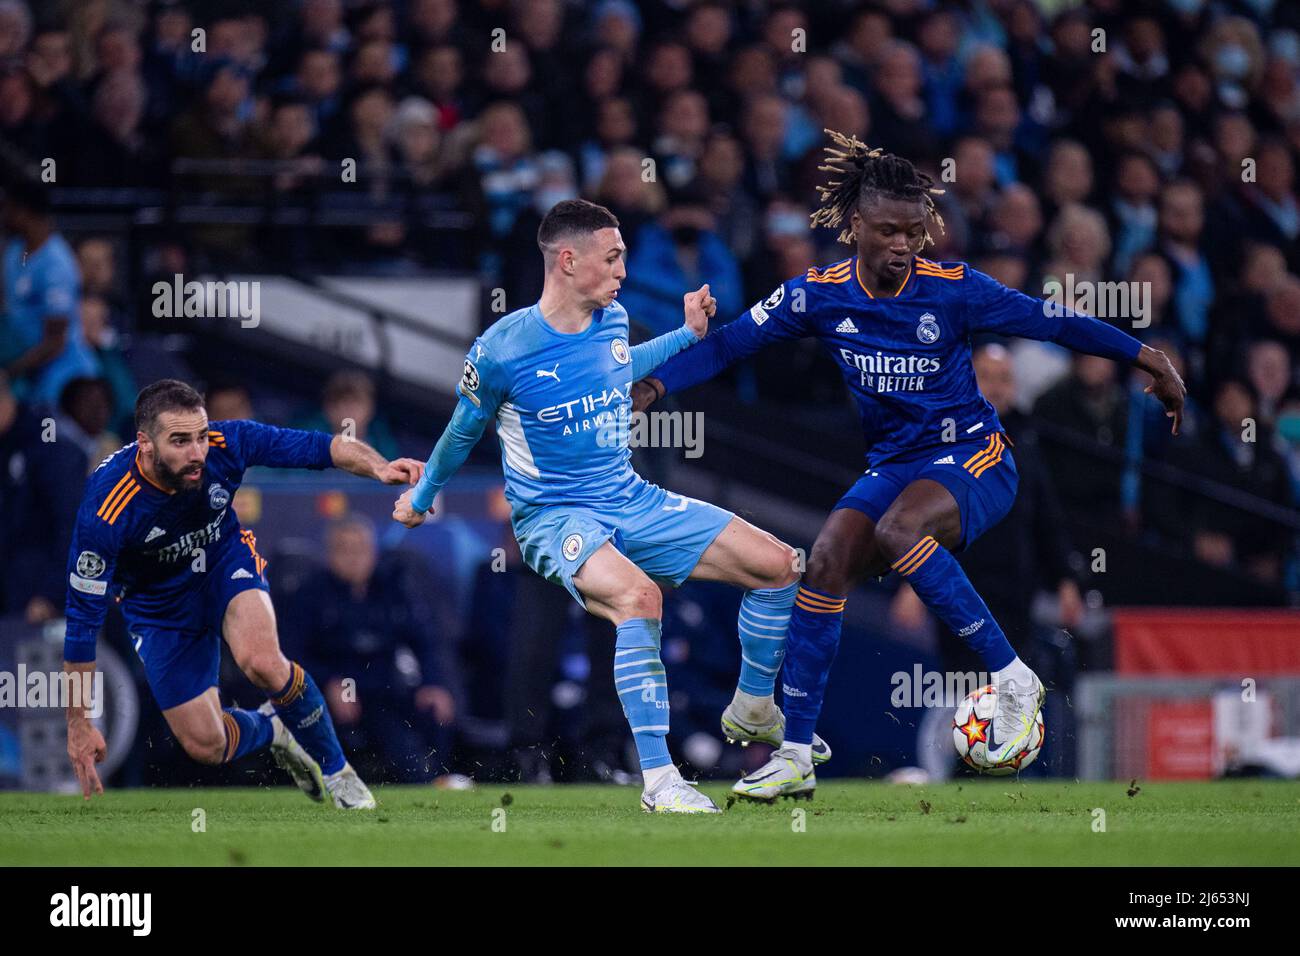 MANCHESTER, ENGLAND - APRIL 26: Eduardo Camavinga dribble ball around Phil Foden of Manchester City during the UEFA Champions League Semi Final Leg One match between Manchester City and Real Madrid at City of Manchester Stadium on April 26, 2022 in Manchester, United Kingdom. (Photo by SF) Credit: Sebo47/Alamy Live News Stock Photo